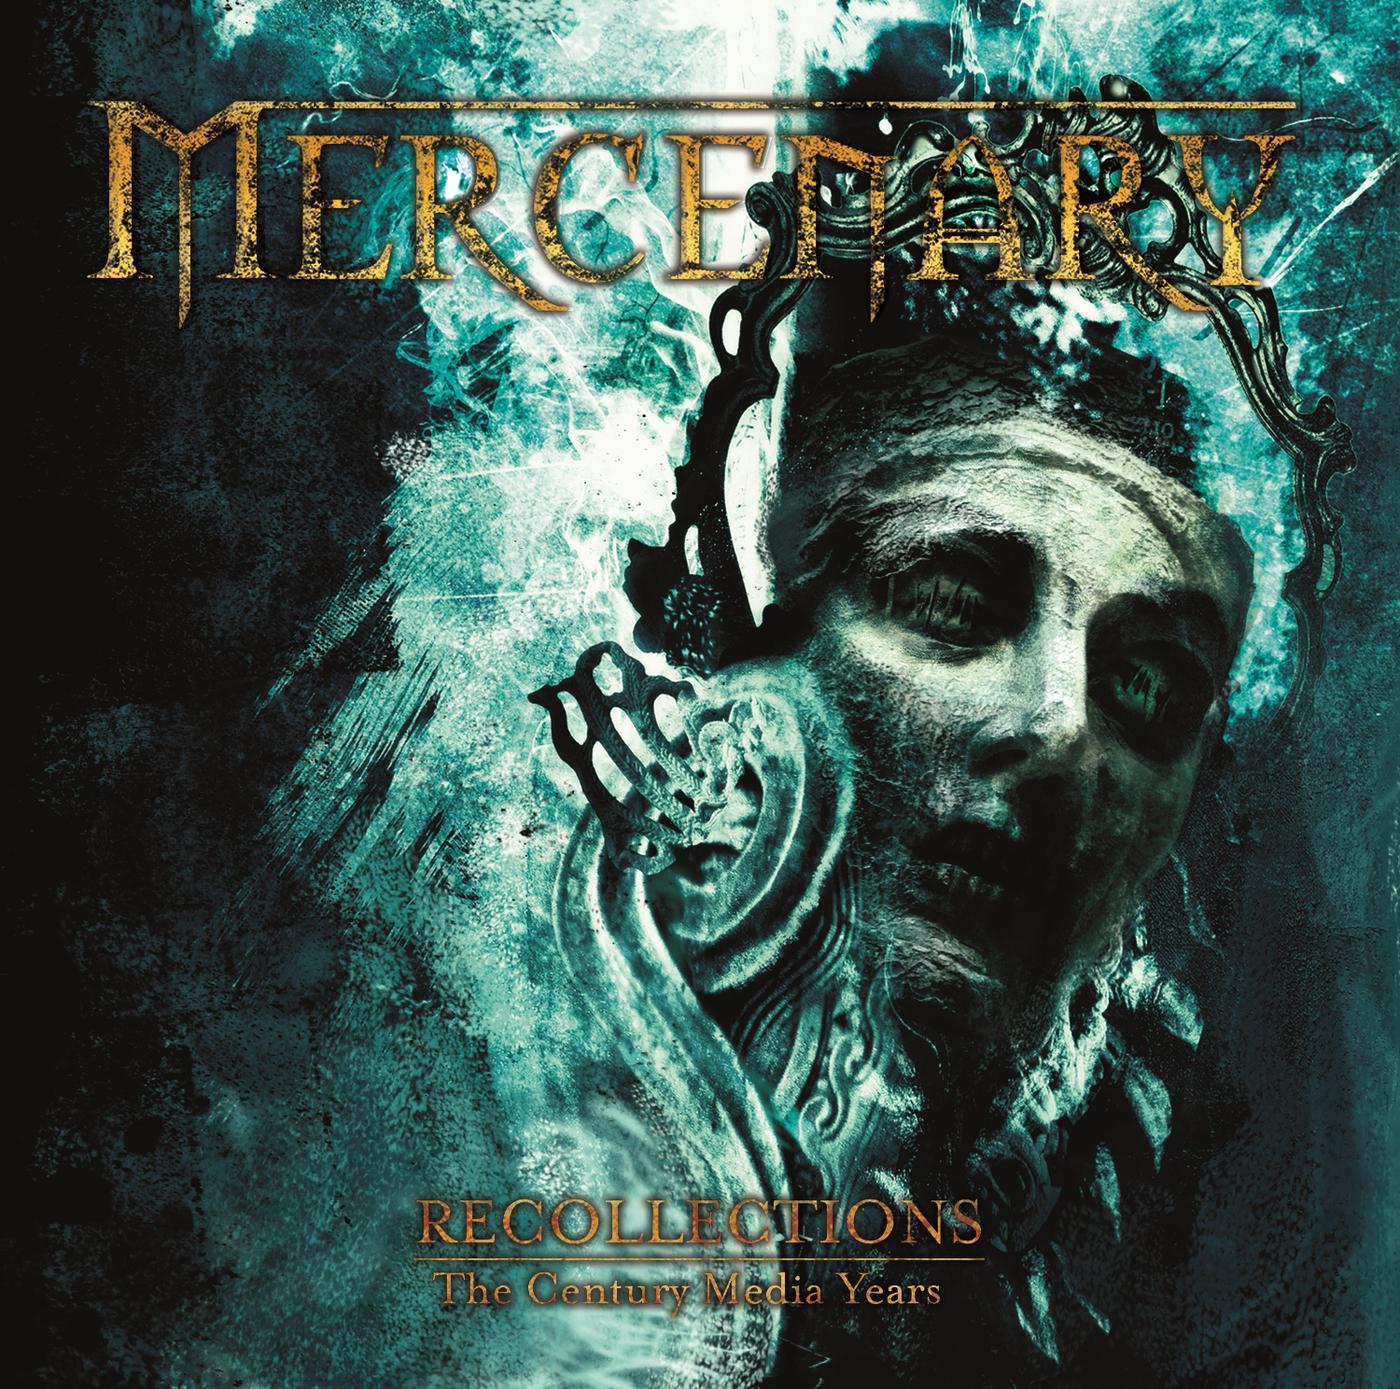 Mercenary - This Black and Endless Never